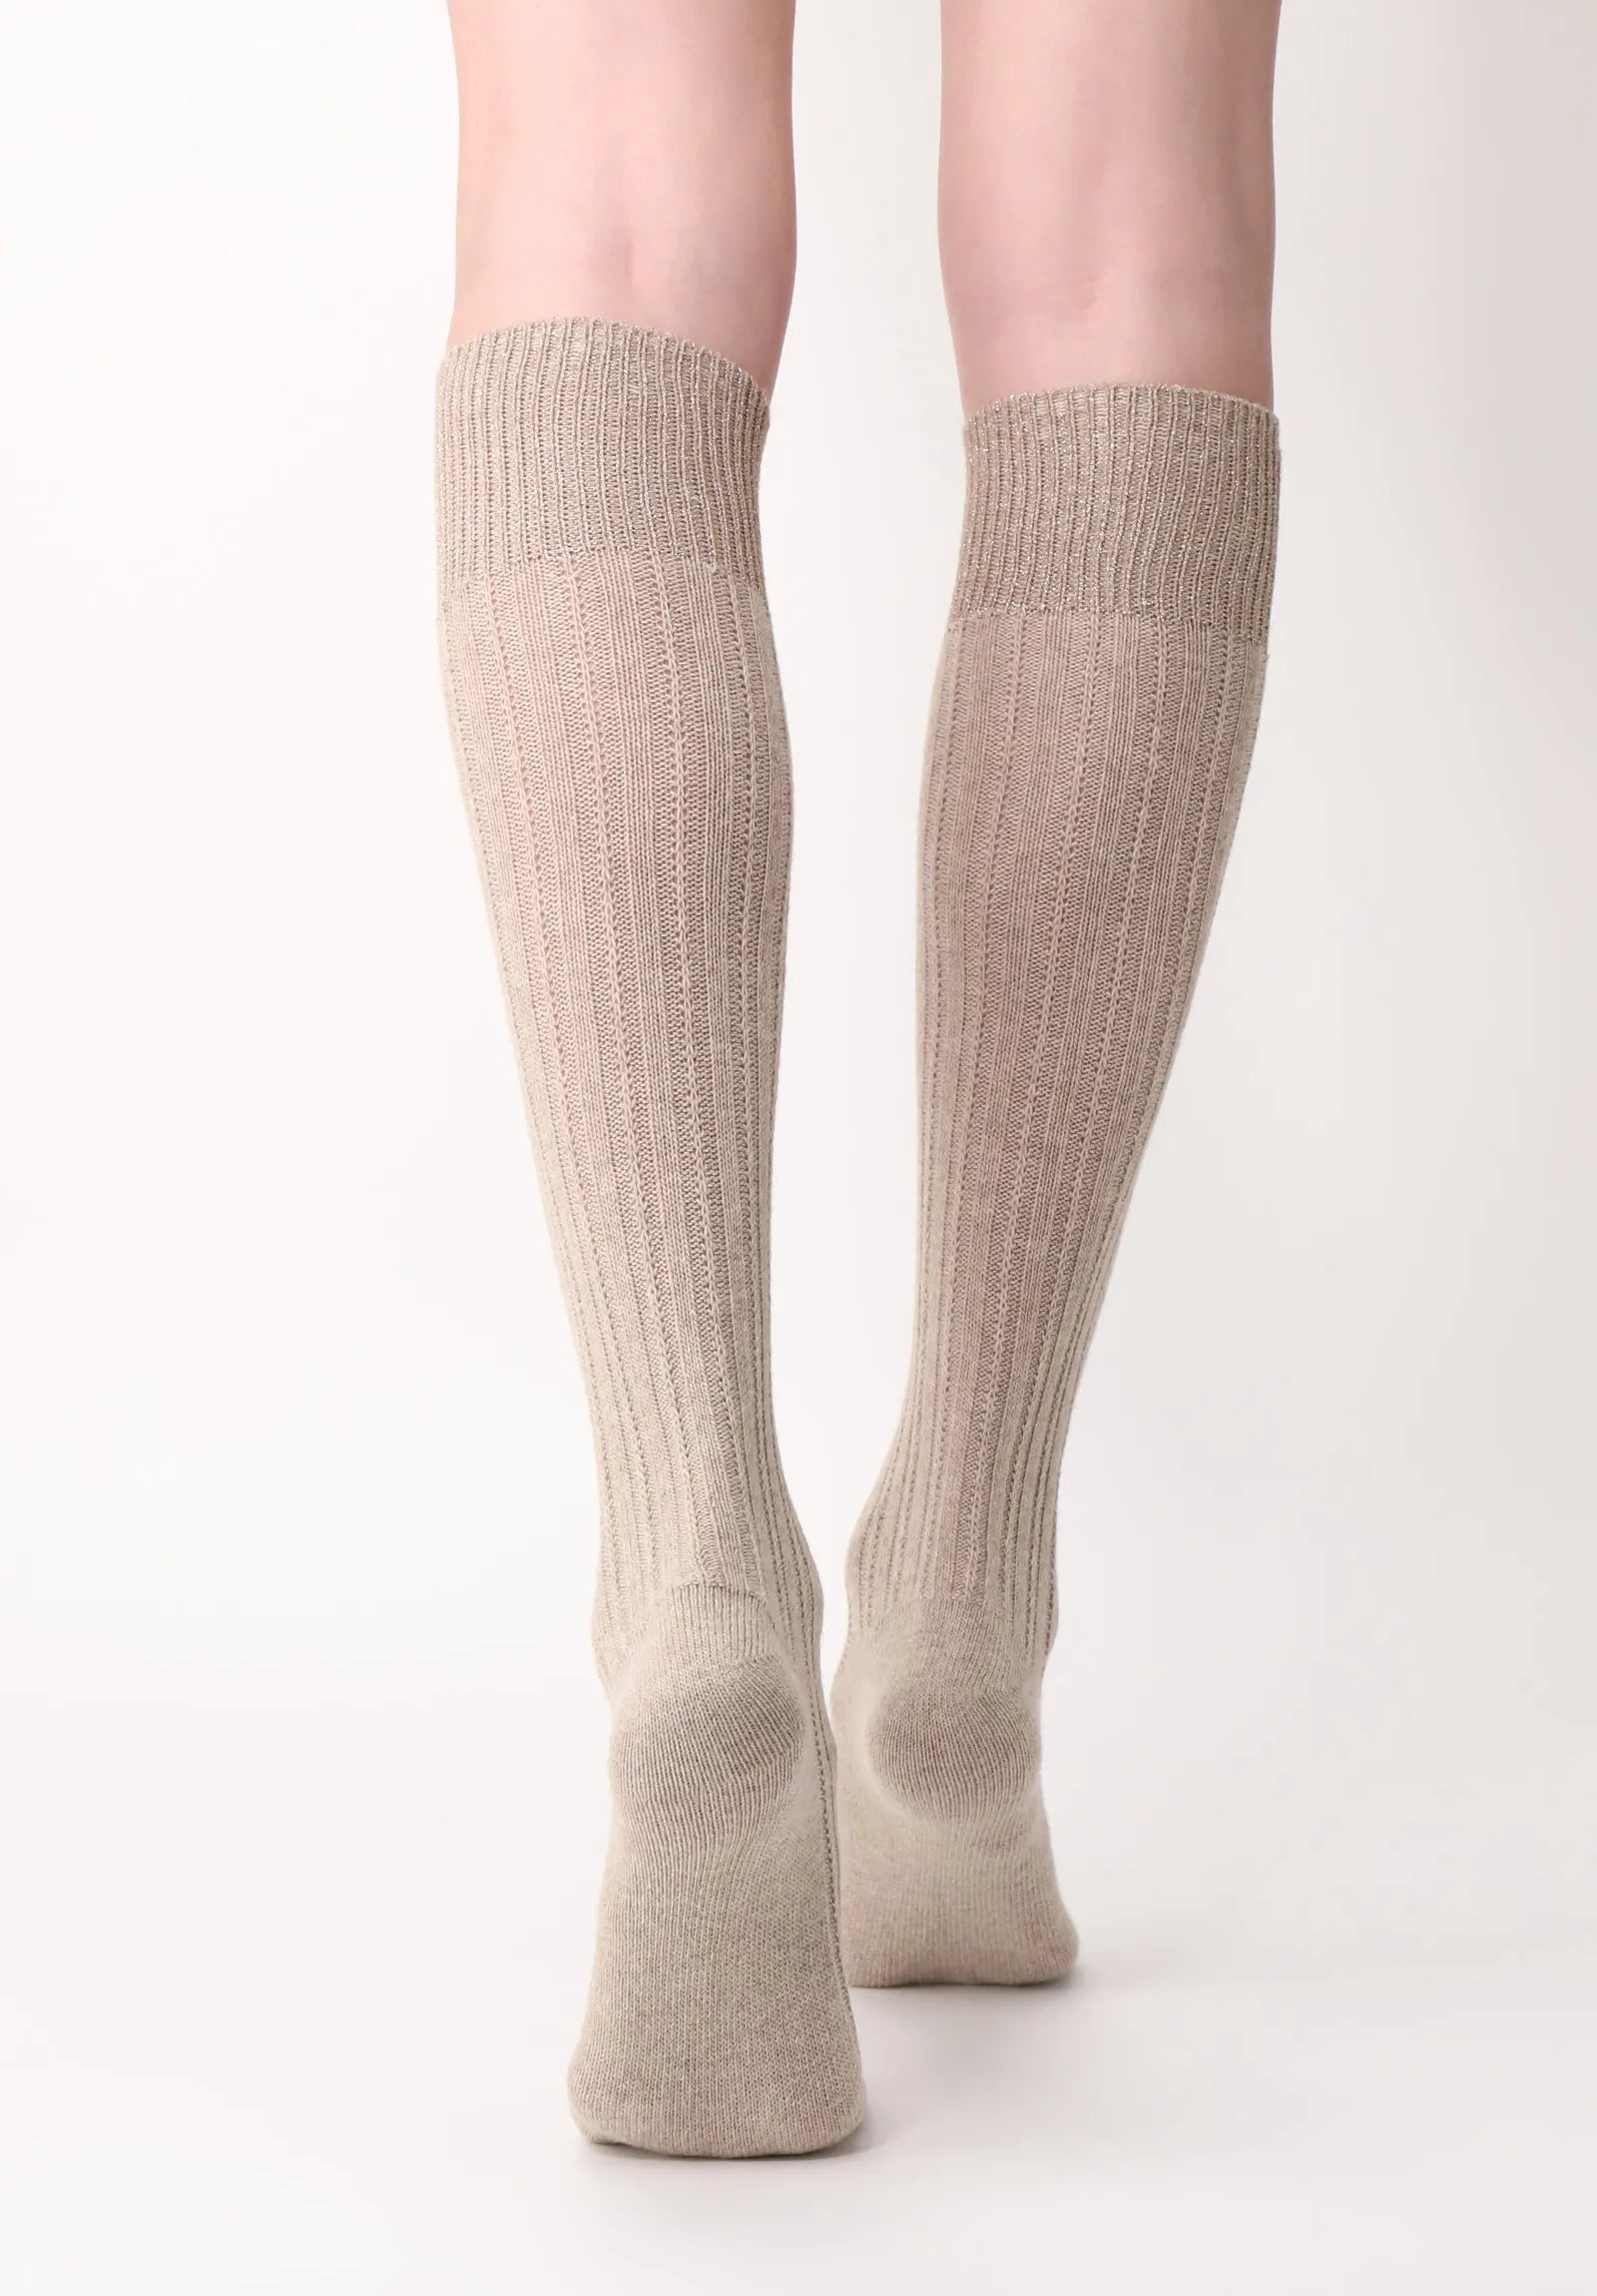 Oroblù Jasmine Gambaletto - Ultra soft and warm beige ribbed knitted knee-high socks with a touch of alpaca, sparkly gold lamé cuff.